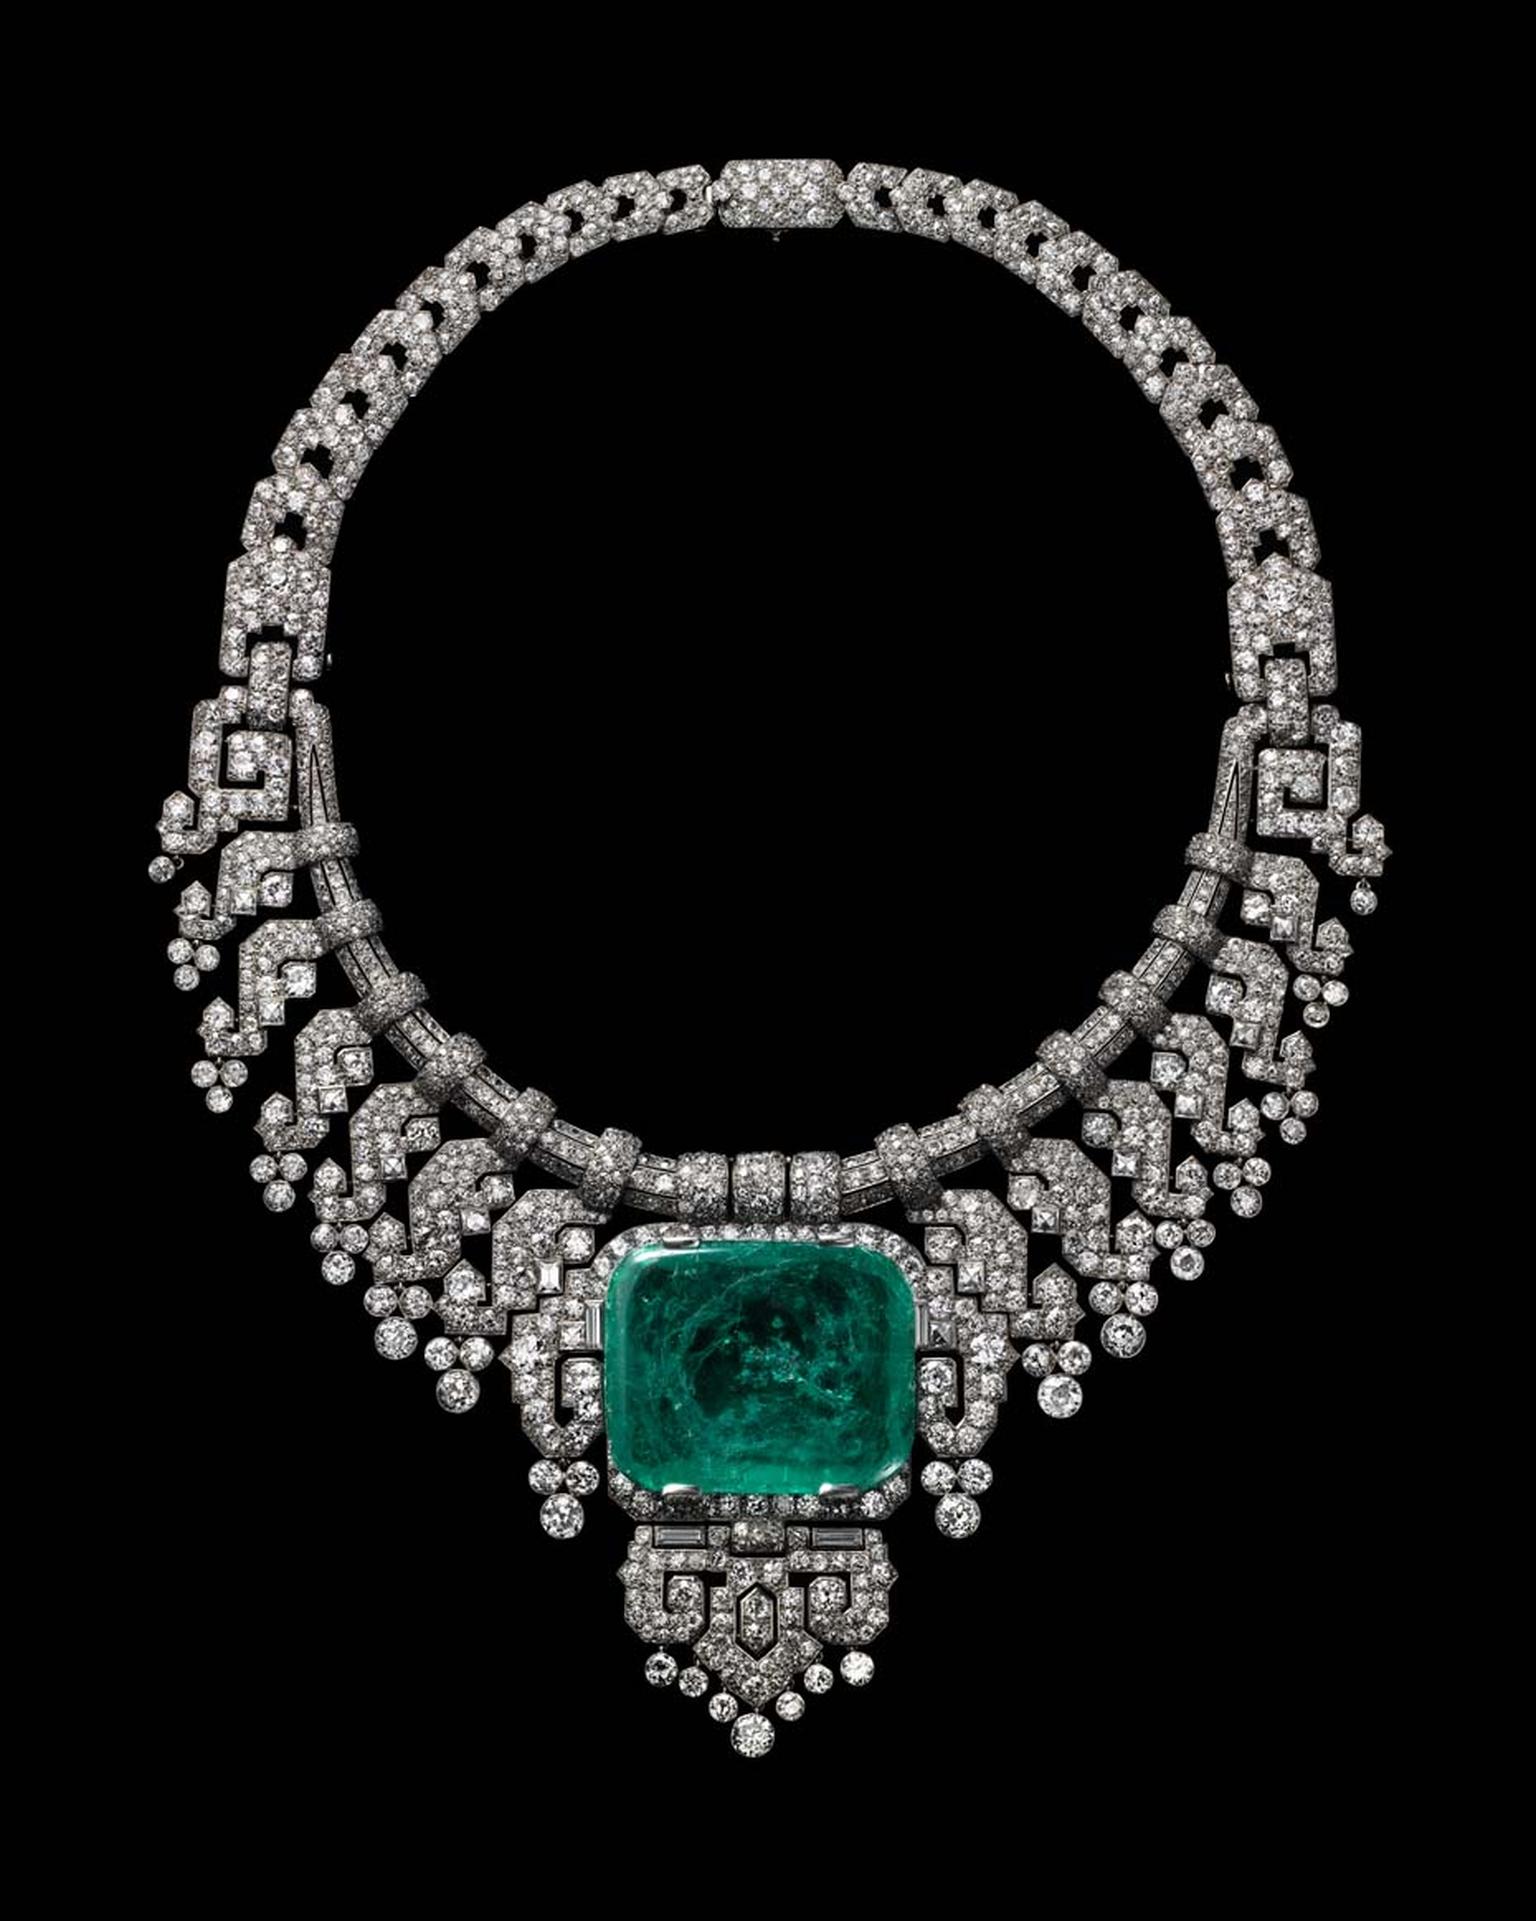 A Cartier diamond and emerald necklace dating from 1932, as worn by the Countess of Granardon show at Cartier's Brilliant exhibition in Denver. Photo: Vincent Wulveryck, Cartier Collection © Cartier